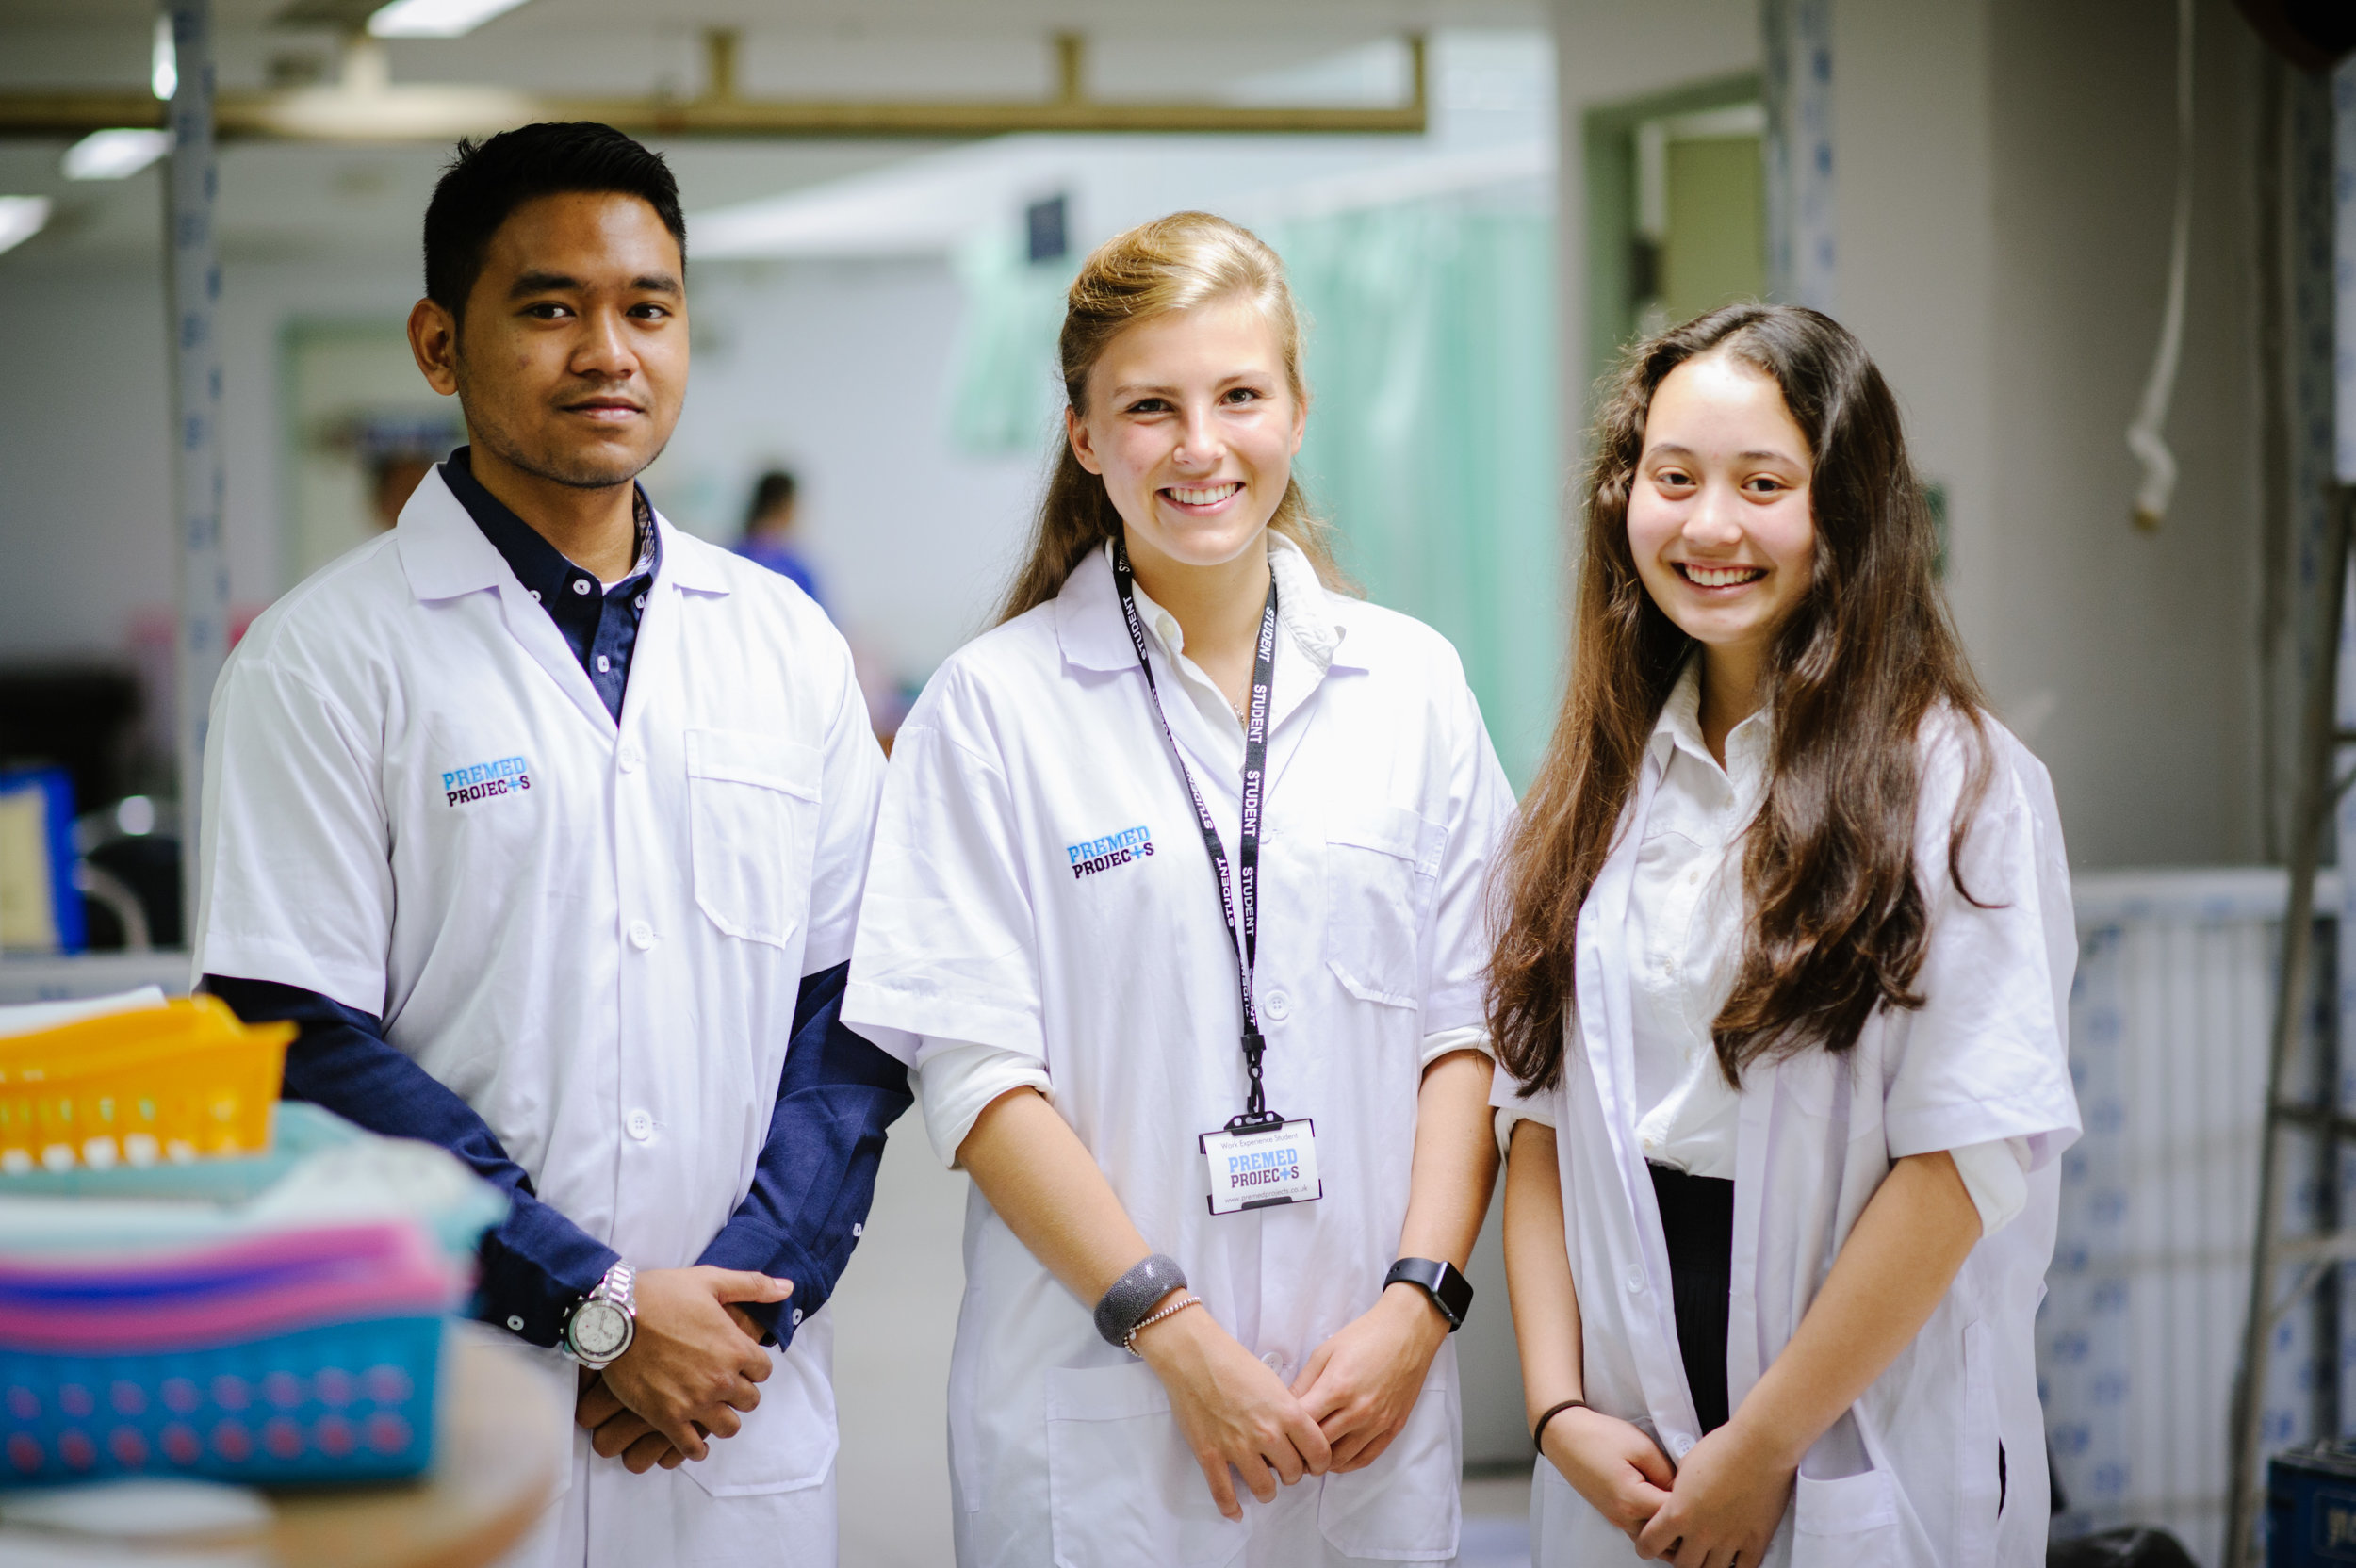 Medicine Work Experience in Hospitals - Premed Projects